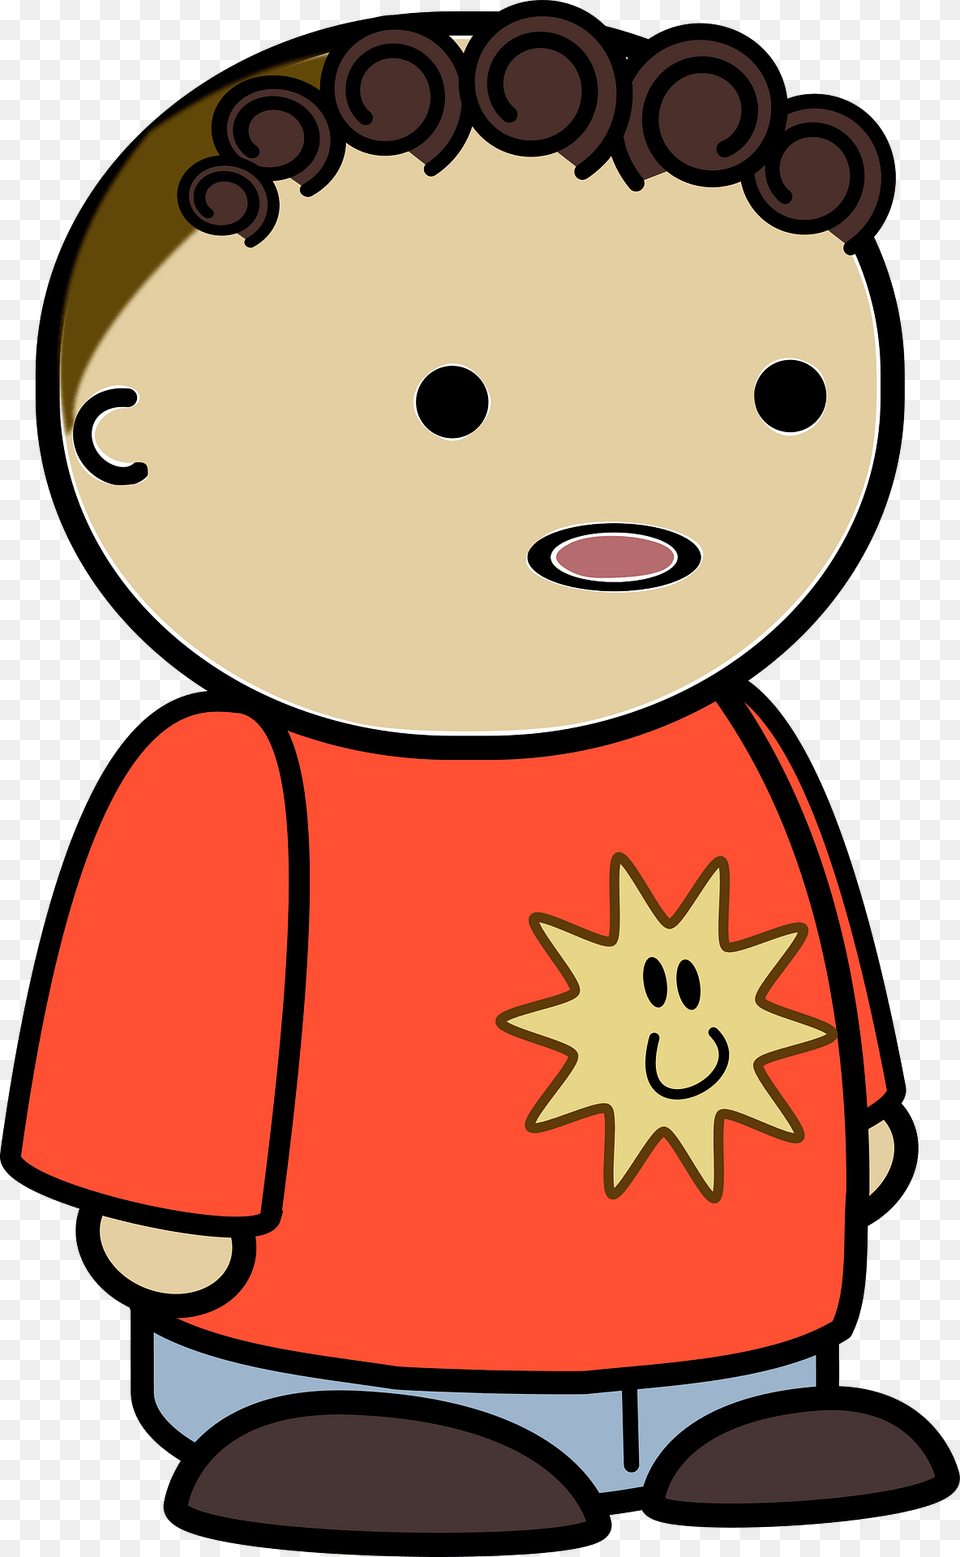 Curly Haired Boy In A Orange Shirt Confused Face To The Side Clipart Free Png